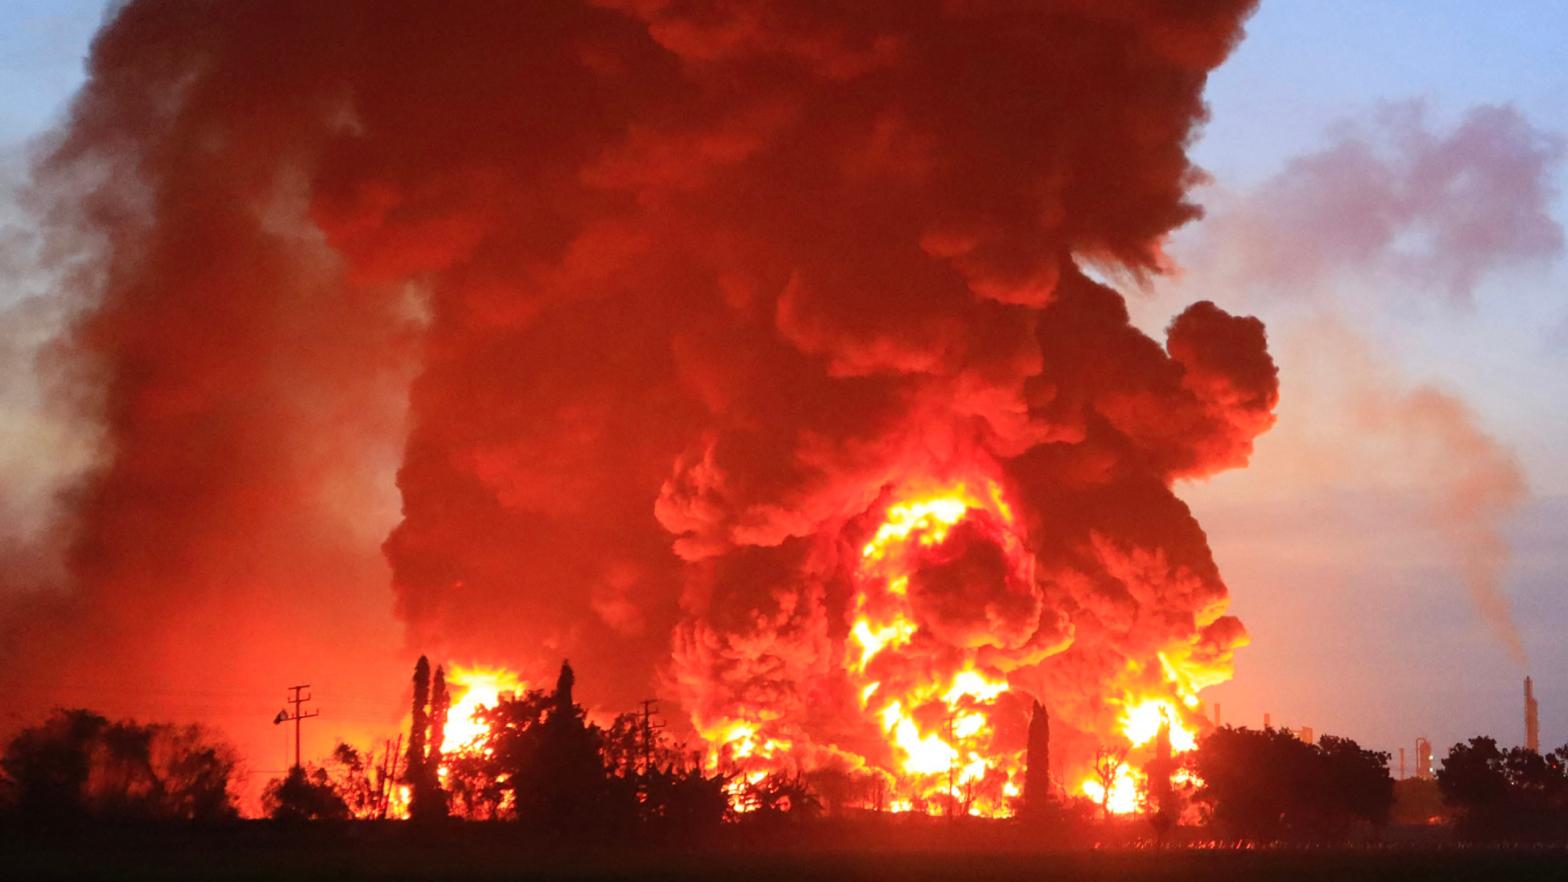 A massive fire rages at the Balongan refinery, operated by state oil company Pertamina, in Indramayu, West Java, on March 29, 2021. (Photo: Agus Sipur, Getty Images)